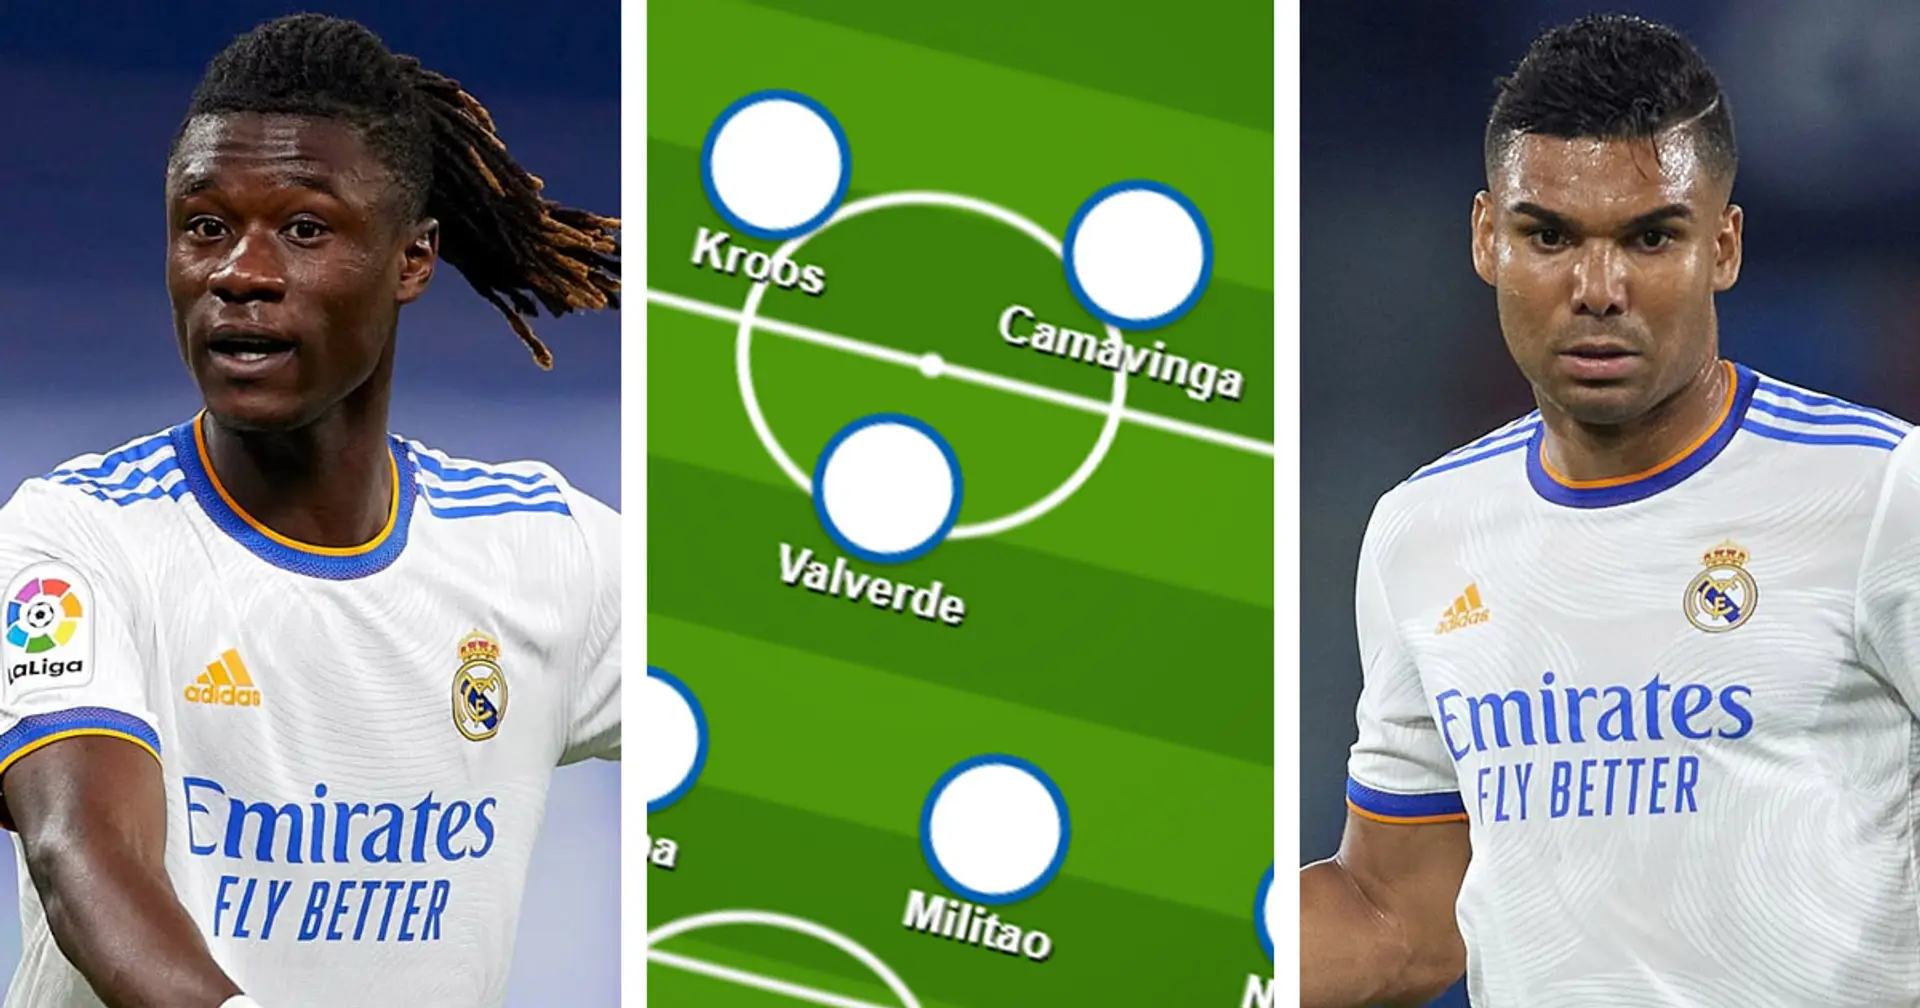 Team news for Real Madrid vs Athletic Bilbao, probable line-ups, score prediction